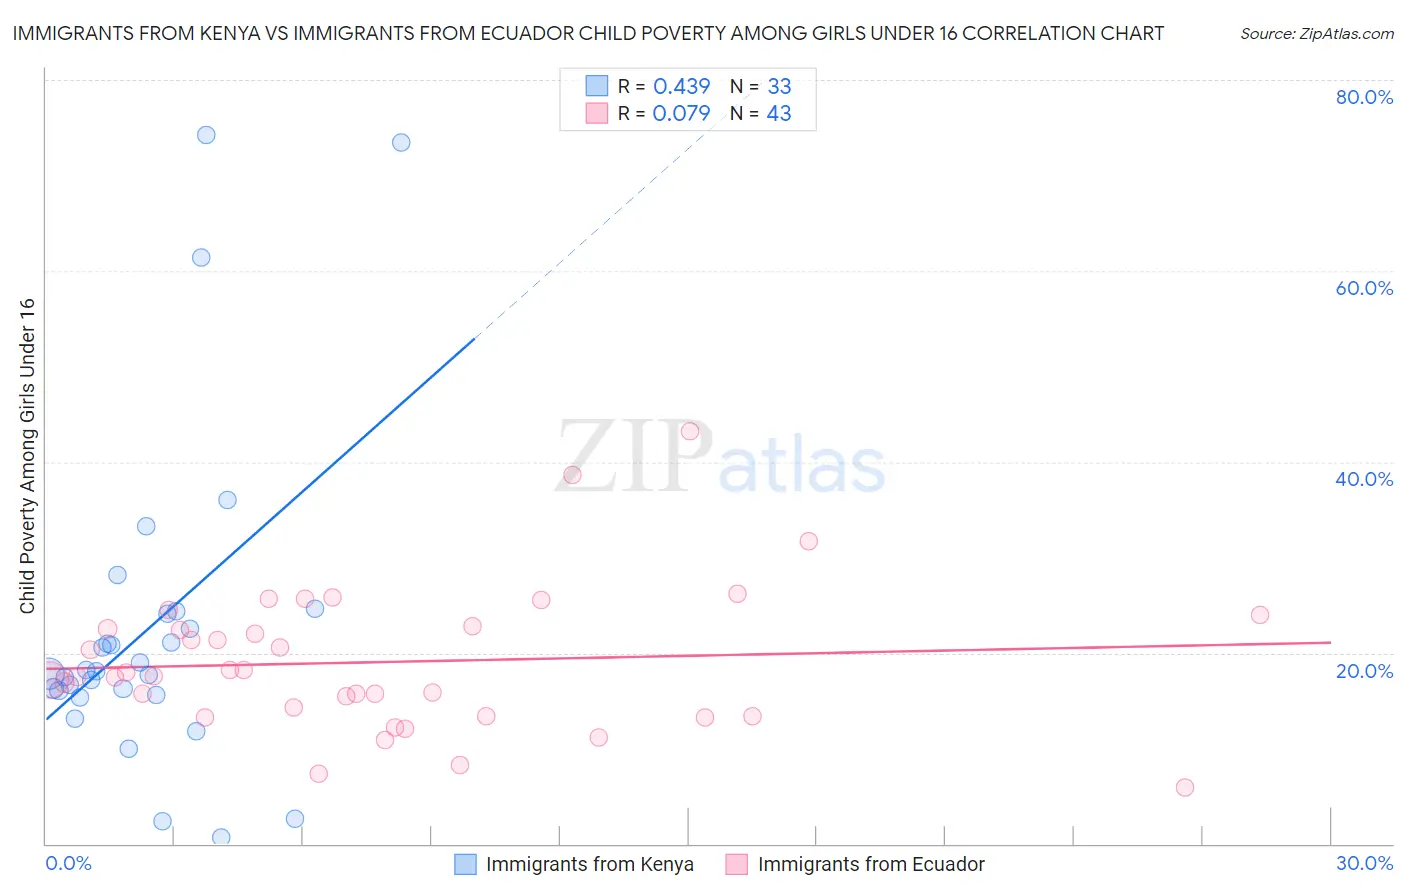 Immigrants from Kenya vs Immigrants from Ecuador Child Poverty Among Girls Under 16